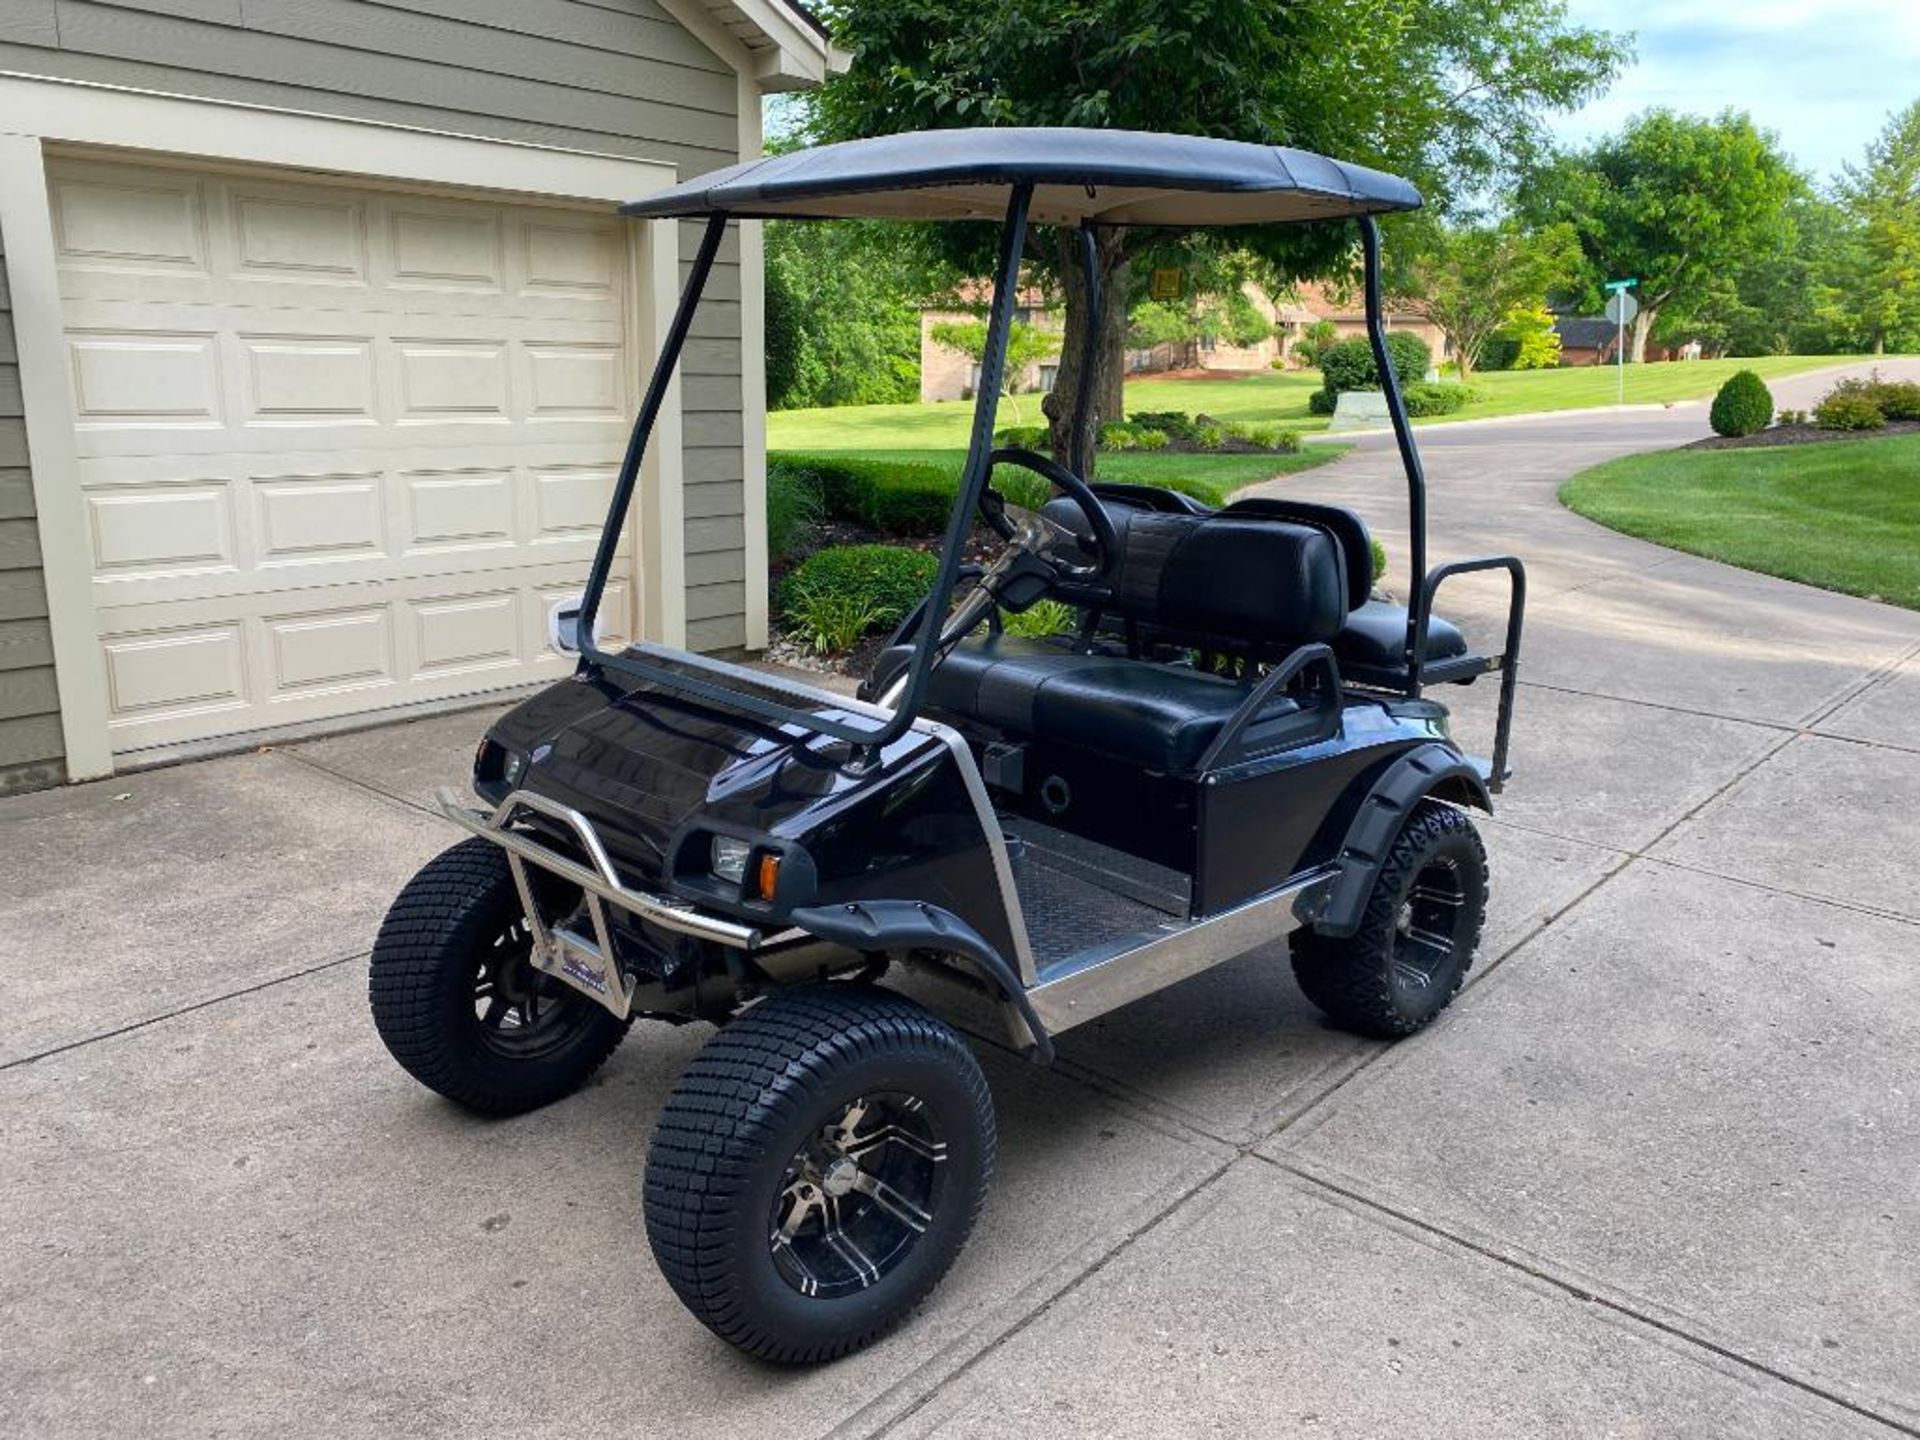 CLUB CAR ELECTRIC GOLF CART, BATTERIES LESS THAN A YEAR OLD, 48V, ALL SPORTS LIFT KIT, AFTERMARKET W